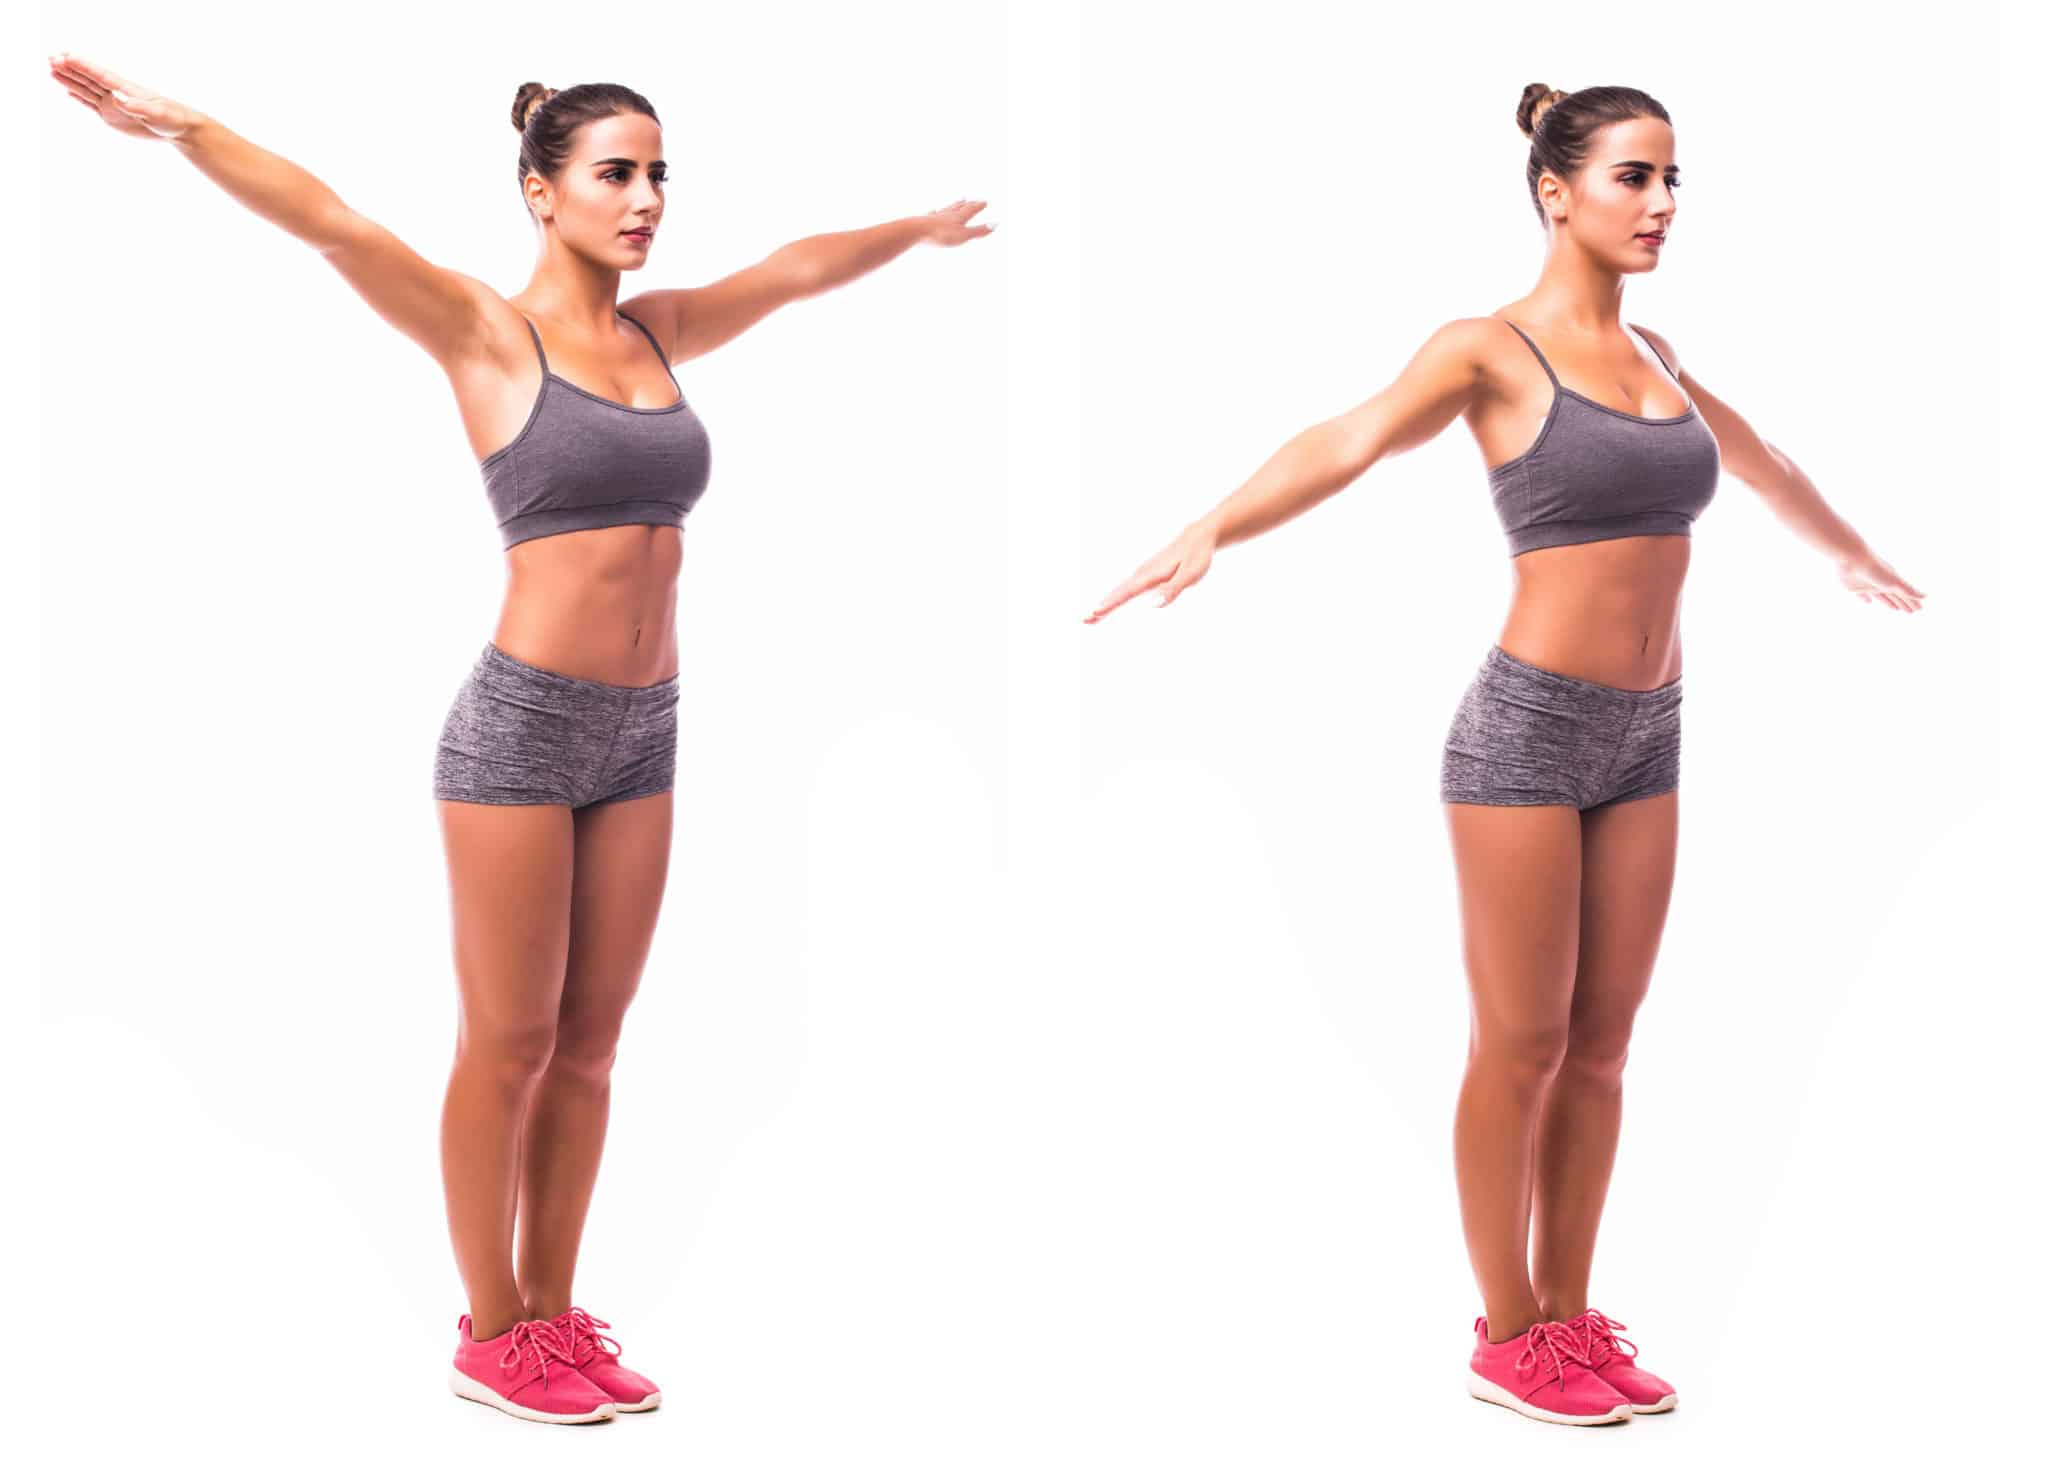 Young woman performing arm circles for a chest workout warm-up